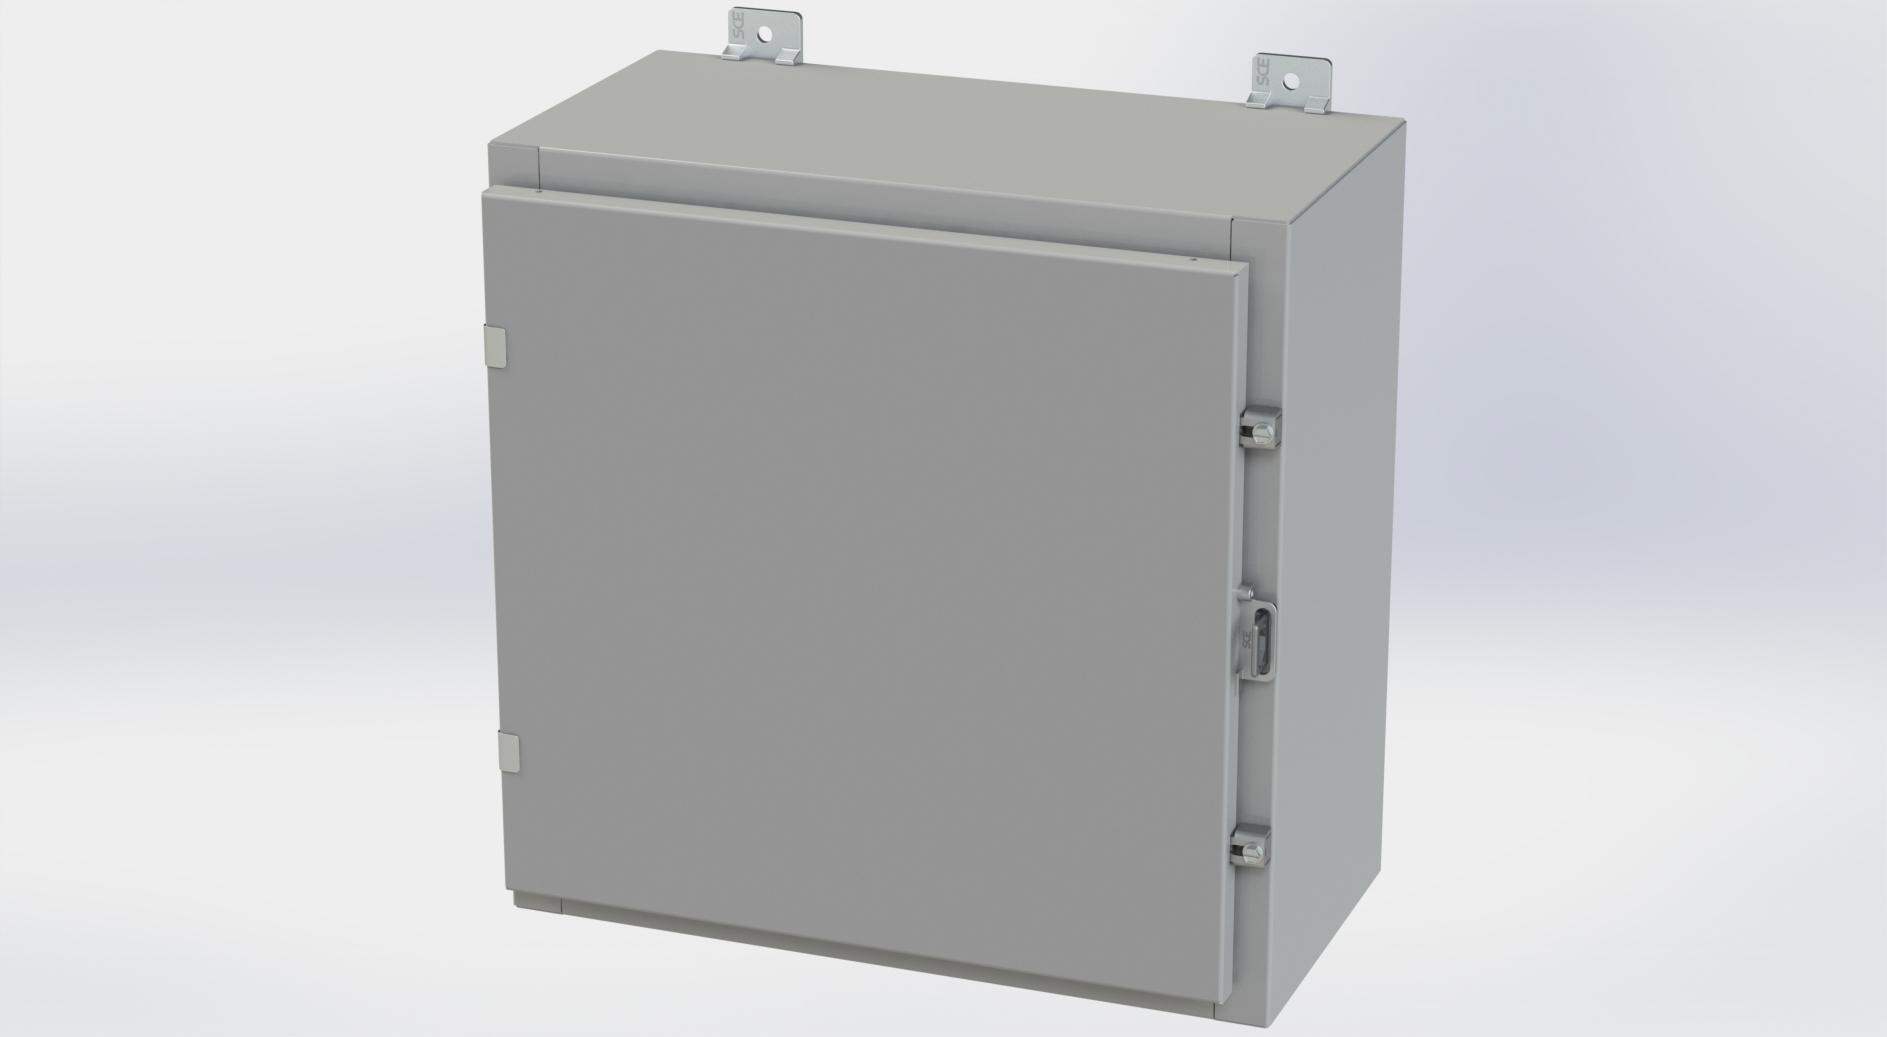 Saginaw Control SCE-20H2010LP Nema 4 LP Enclosure, Height:20.00", Width:20.00", Depth:10.00", ANSI-61 gray powder coating inside and out. Optional panels are powder coated white.